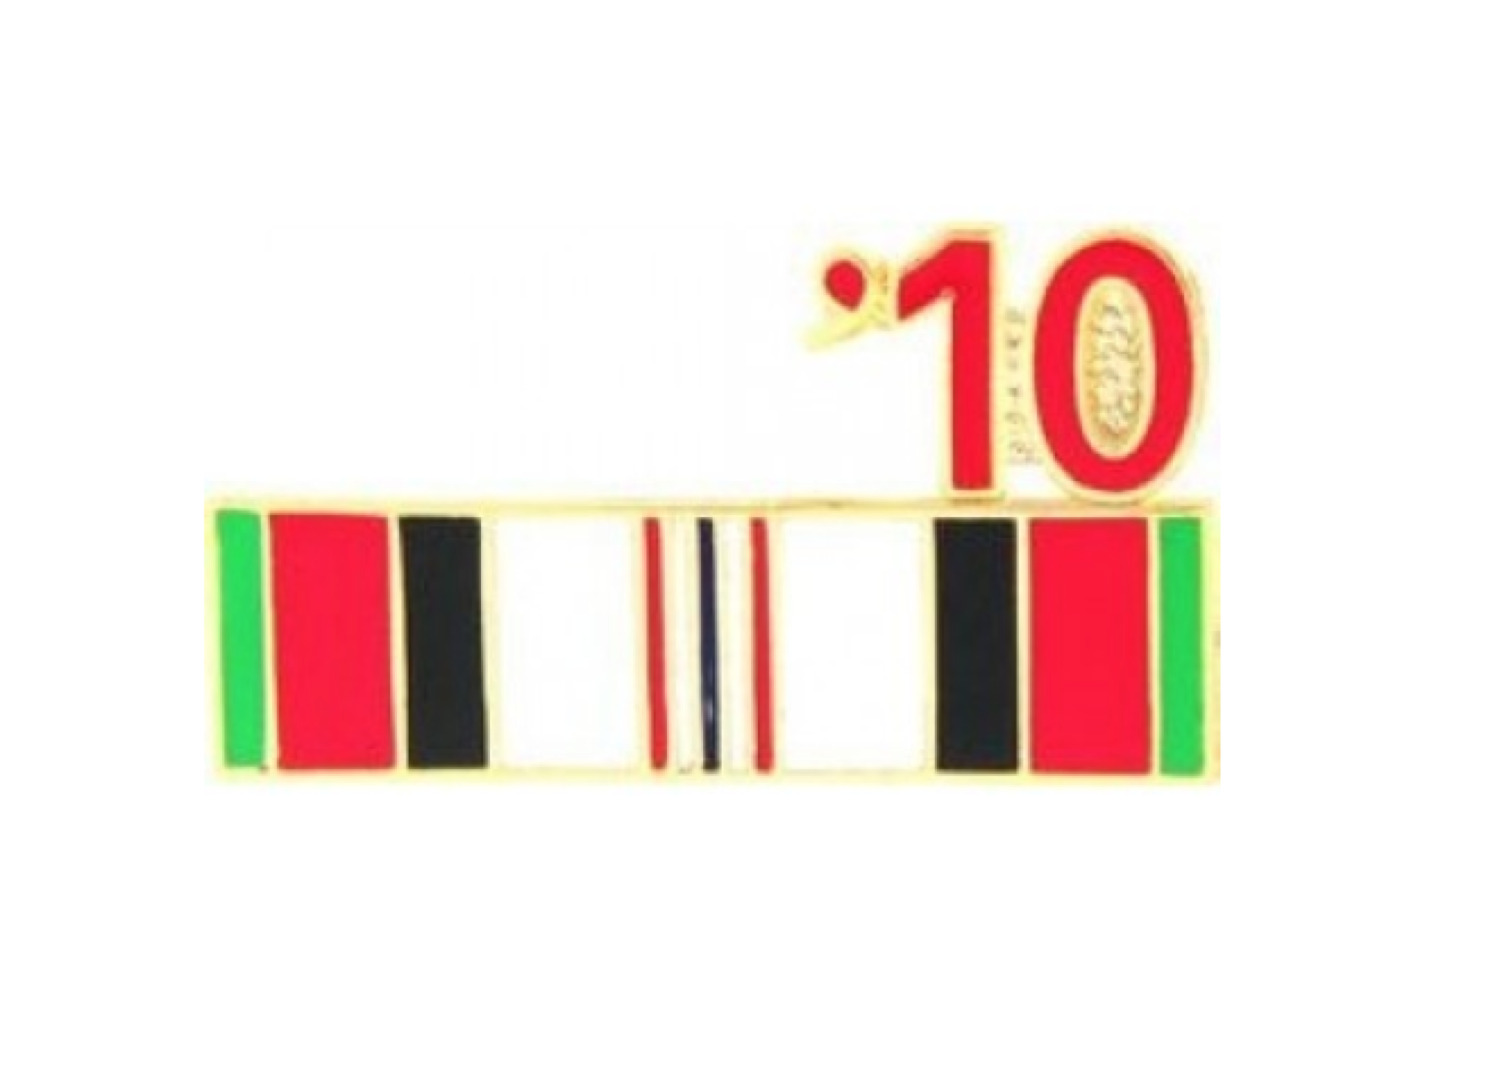 2010 Afghanistan Ribbon Pin - 14602 (7/8 inch) Licensed by HMC Honors